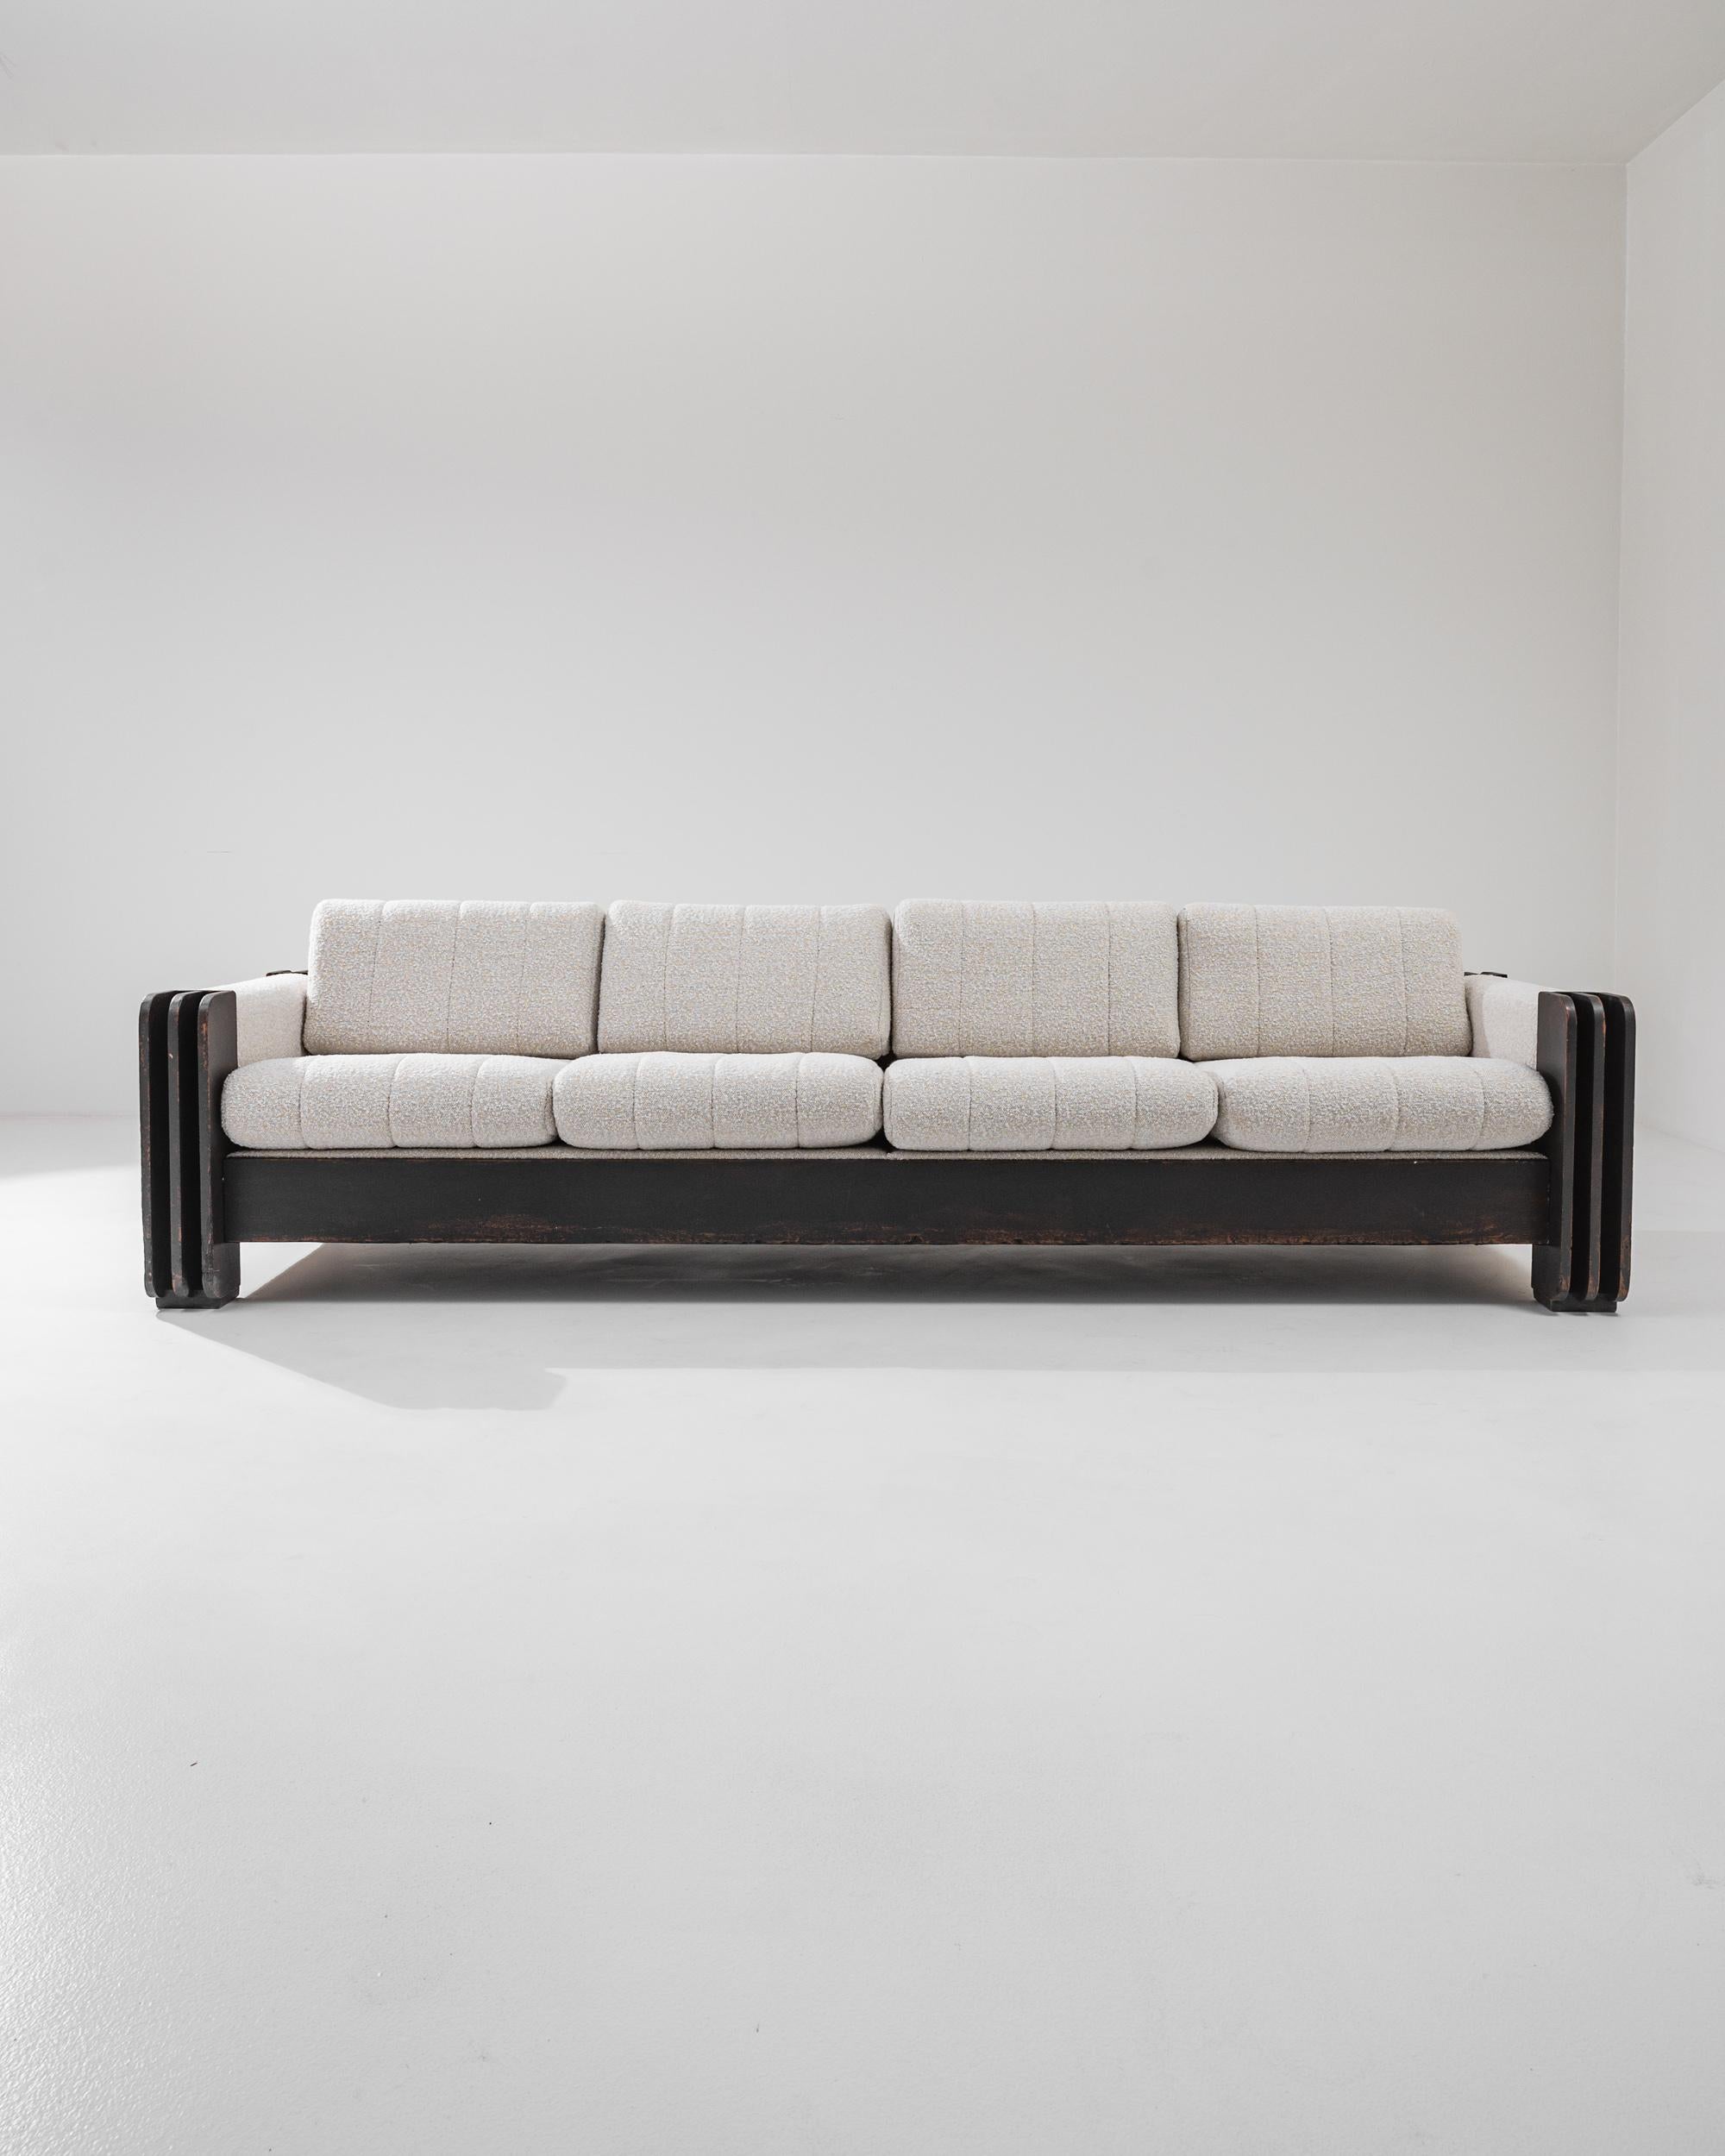 Designed in the 1960’s, this avant-garde four-seater sofa showcases a brutalist base with boldly carved armrests and comfortable upholstered cushions. The juxtaposition of dark patinated wood and the light bouclé upholstery elevates the